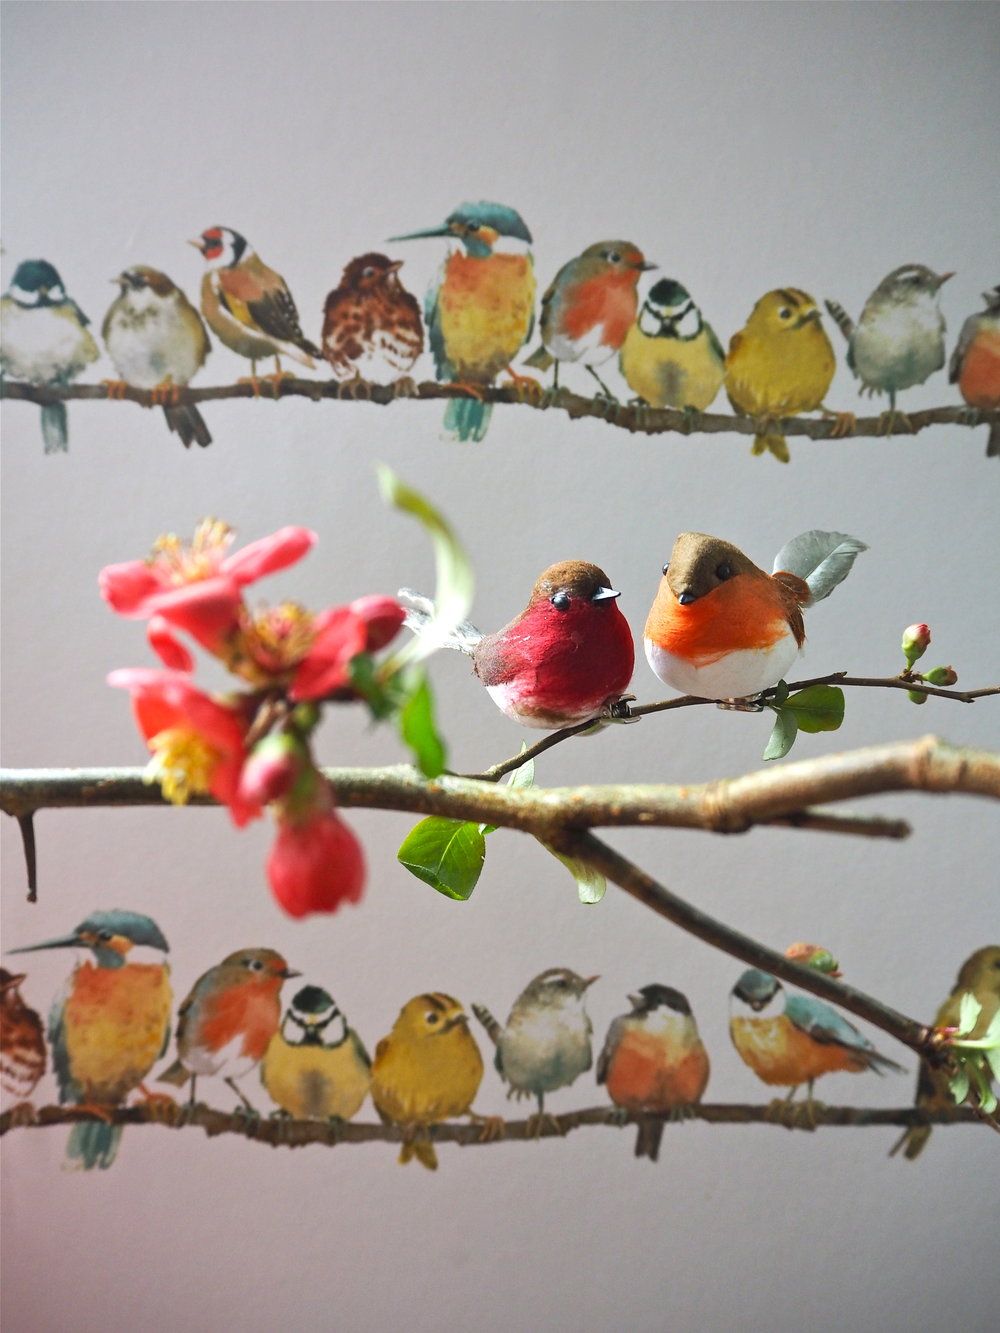 Birds, Flowers & Butterflies: The New Spring Wallpaper Collections From Laura Ashley